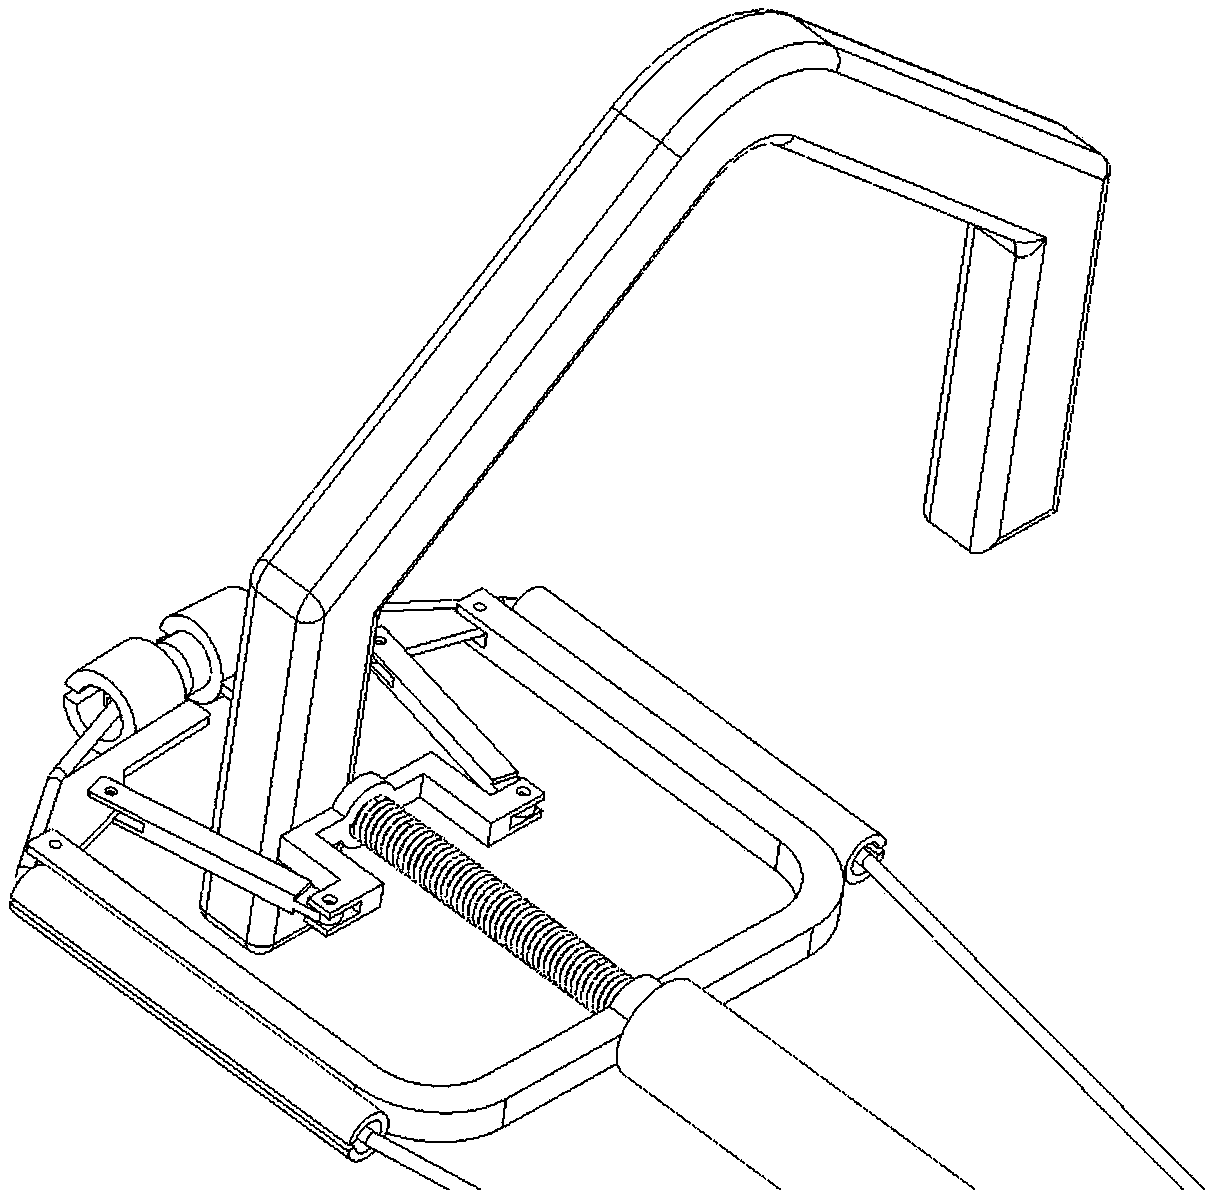 A water surface salvage rope threading device